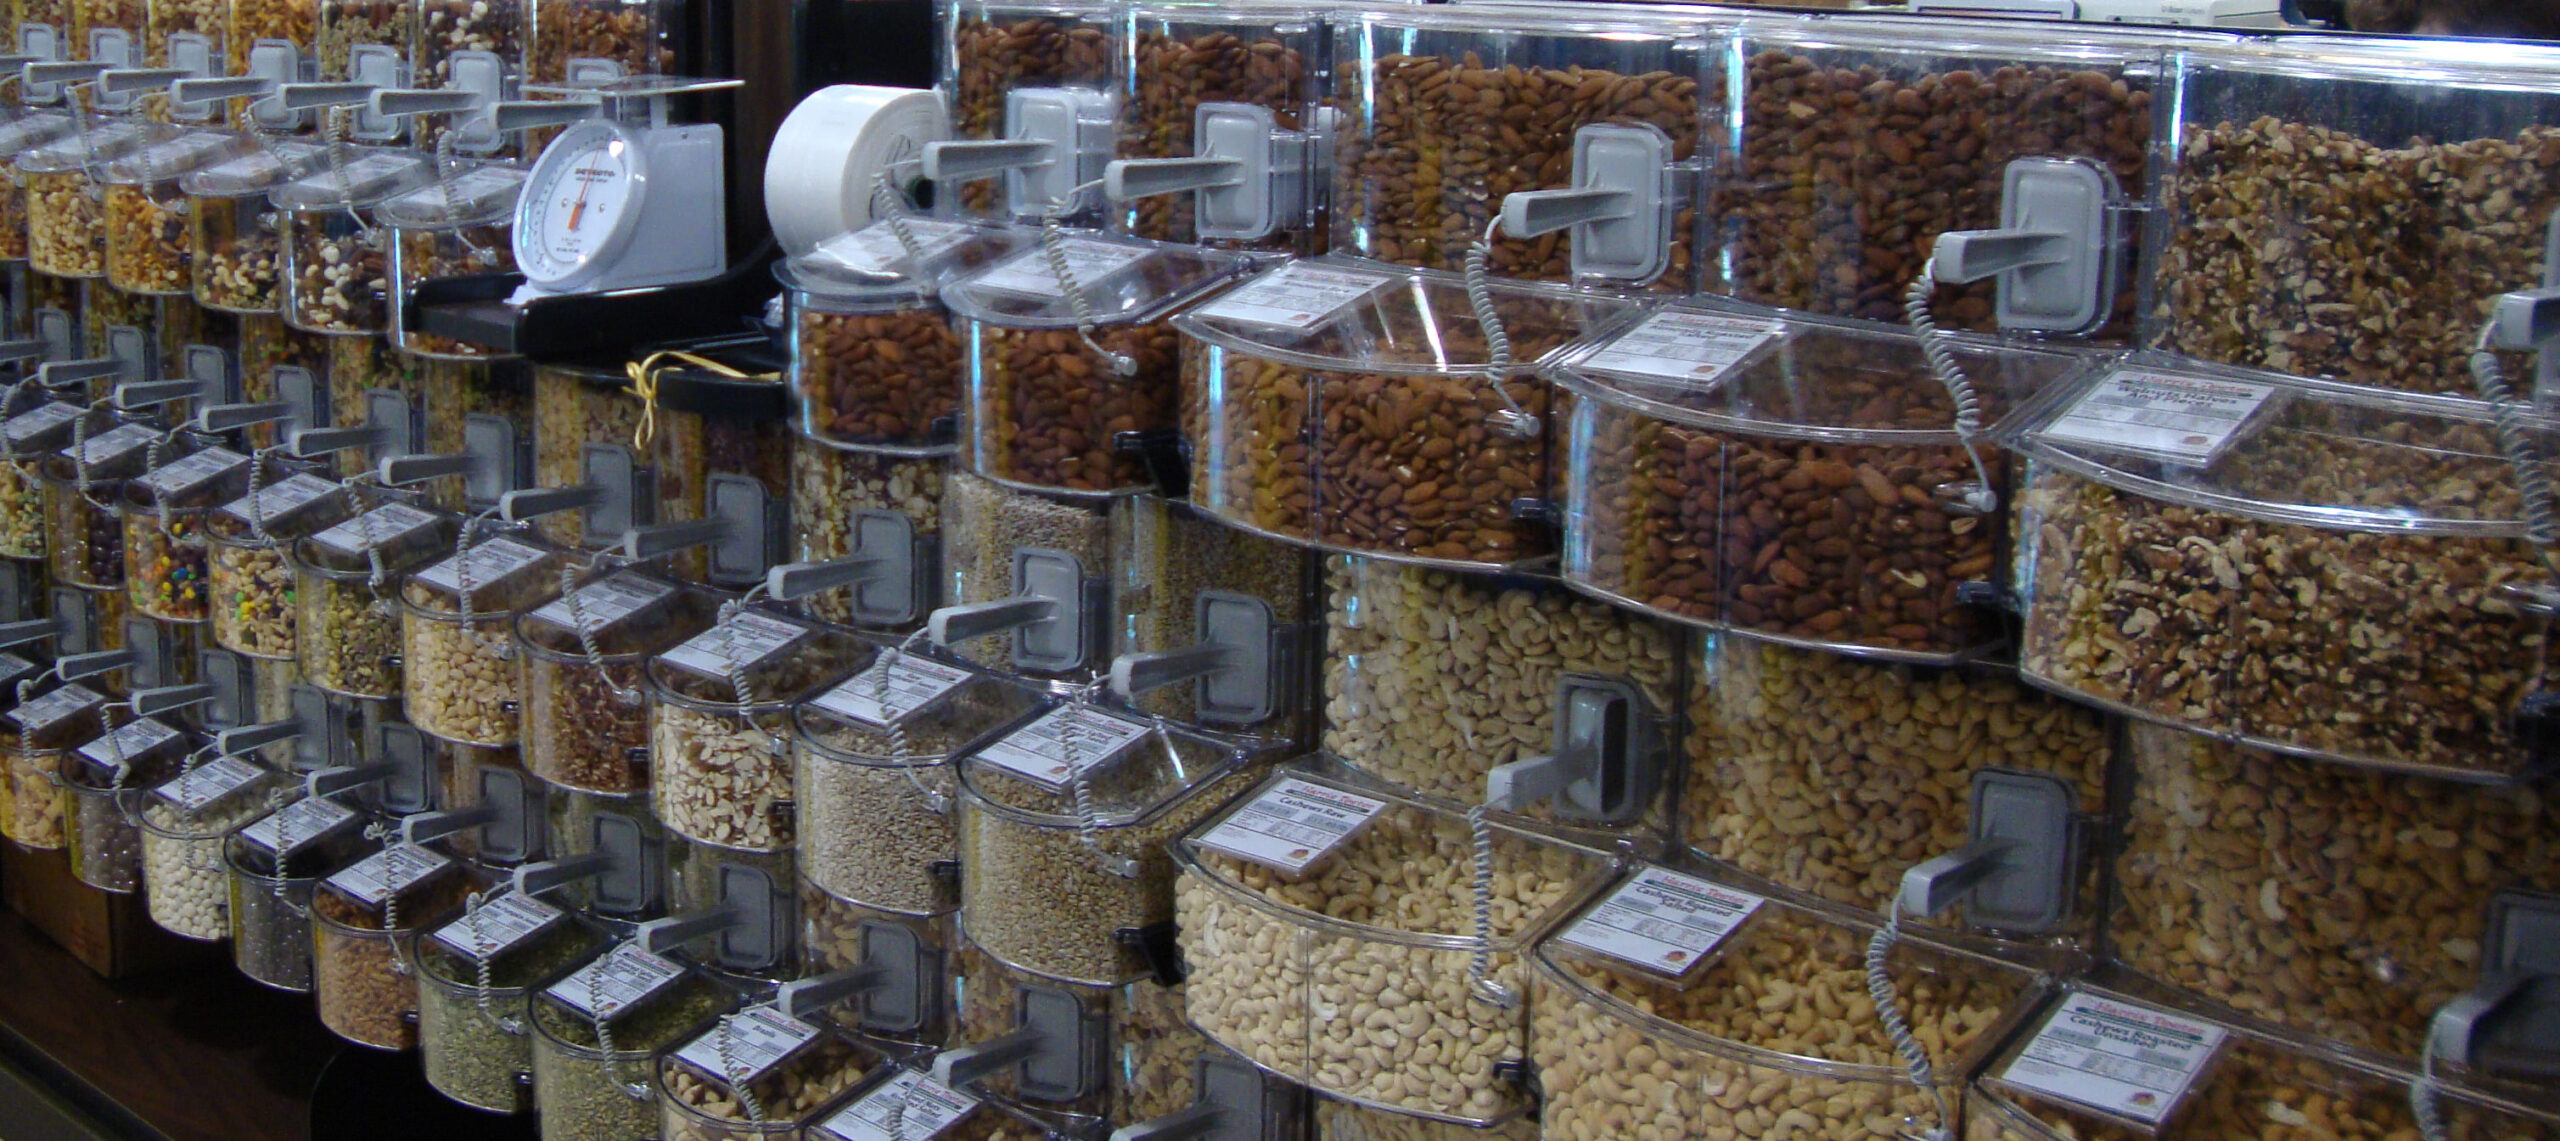 A photo of a store aisle with nut filled gravity bins.